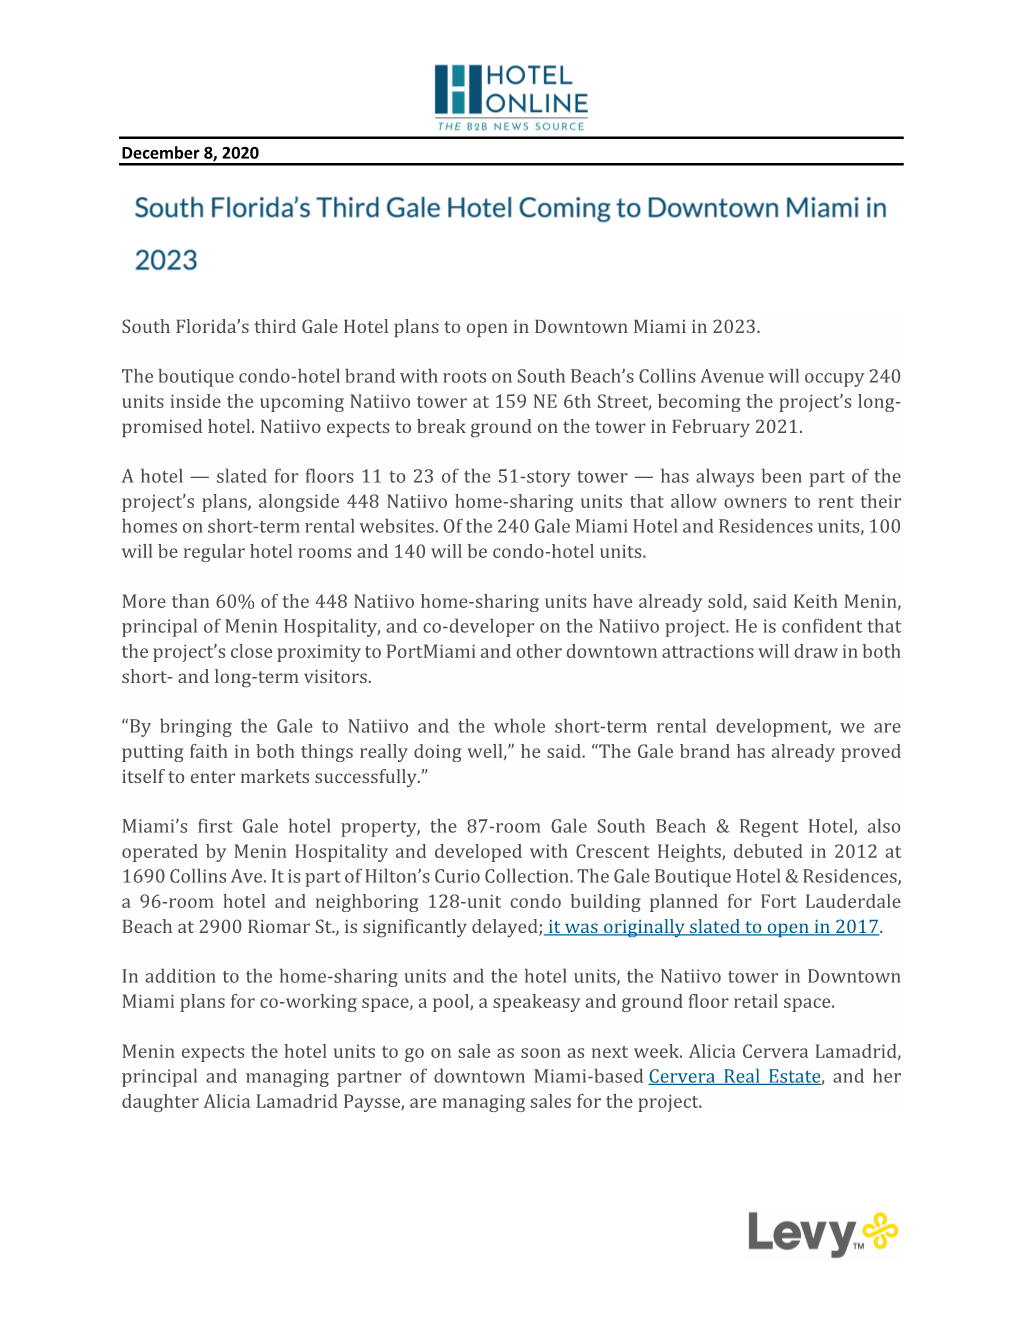 South Florida's Third Gale Hotel Plans to Open in Downtown Miami in 2023